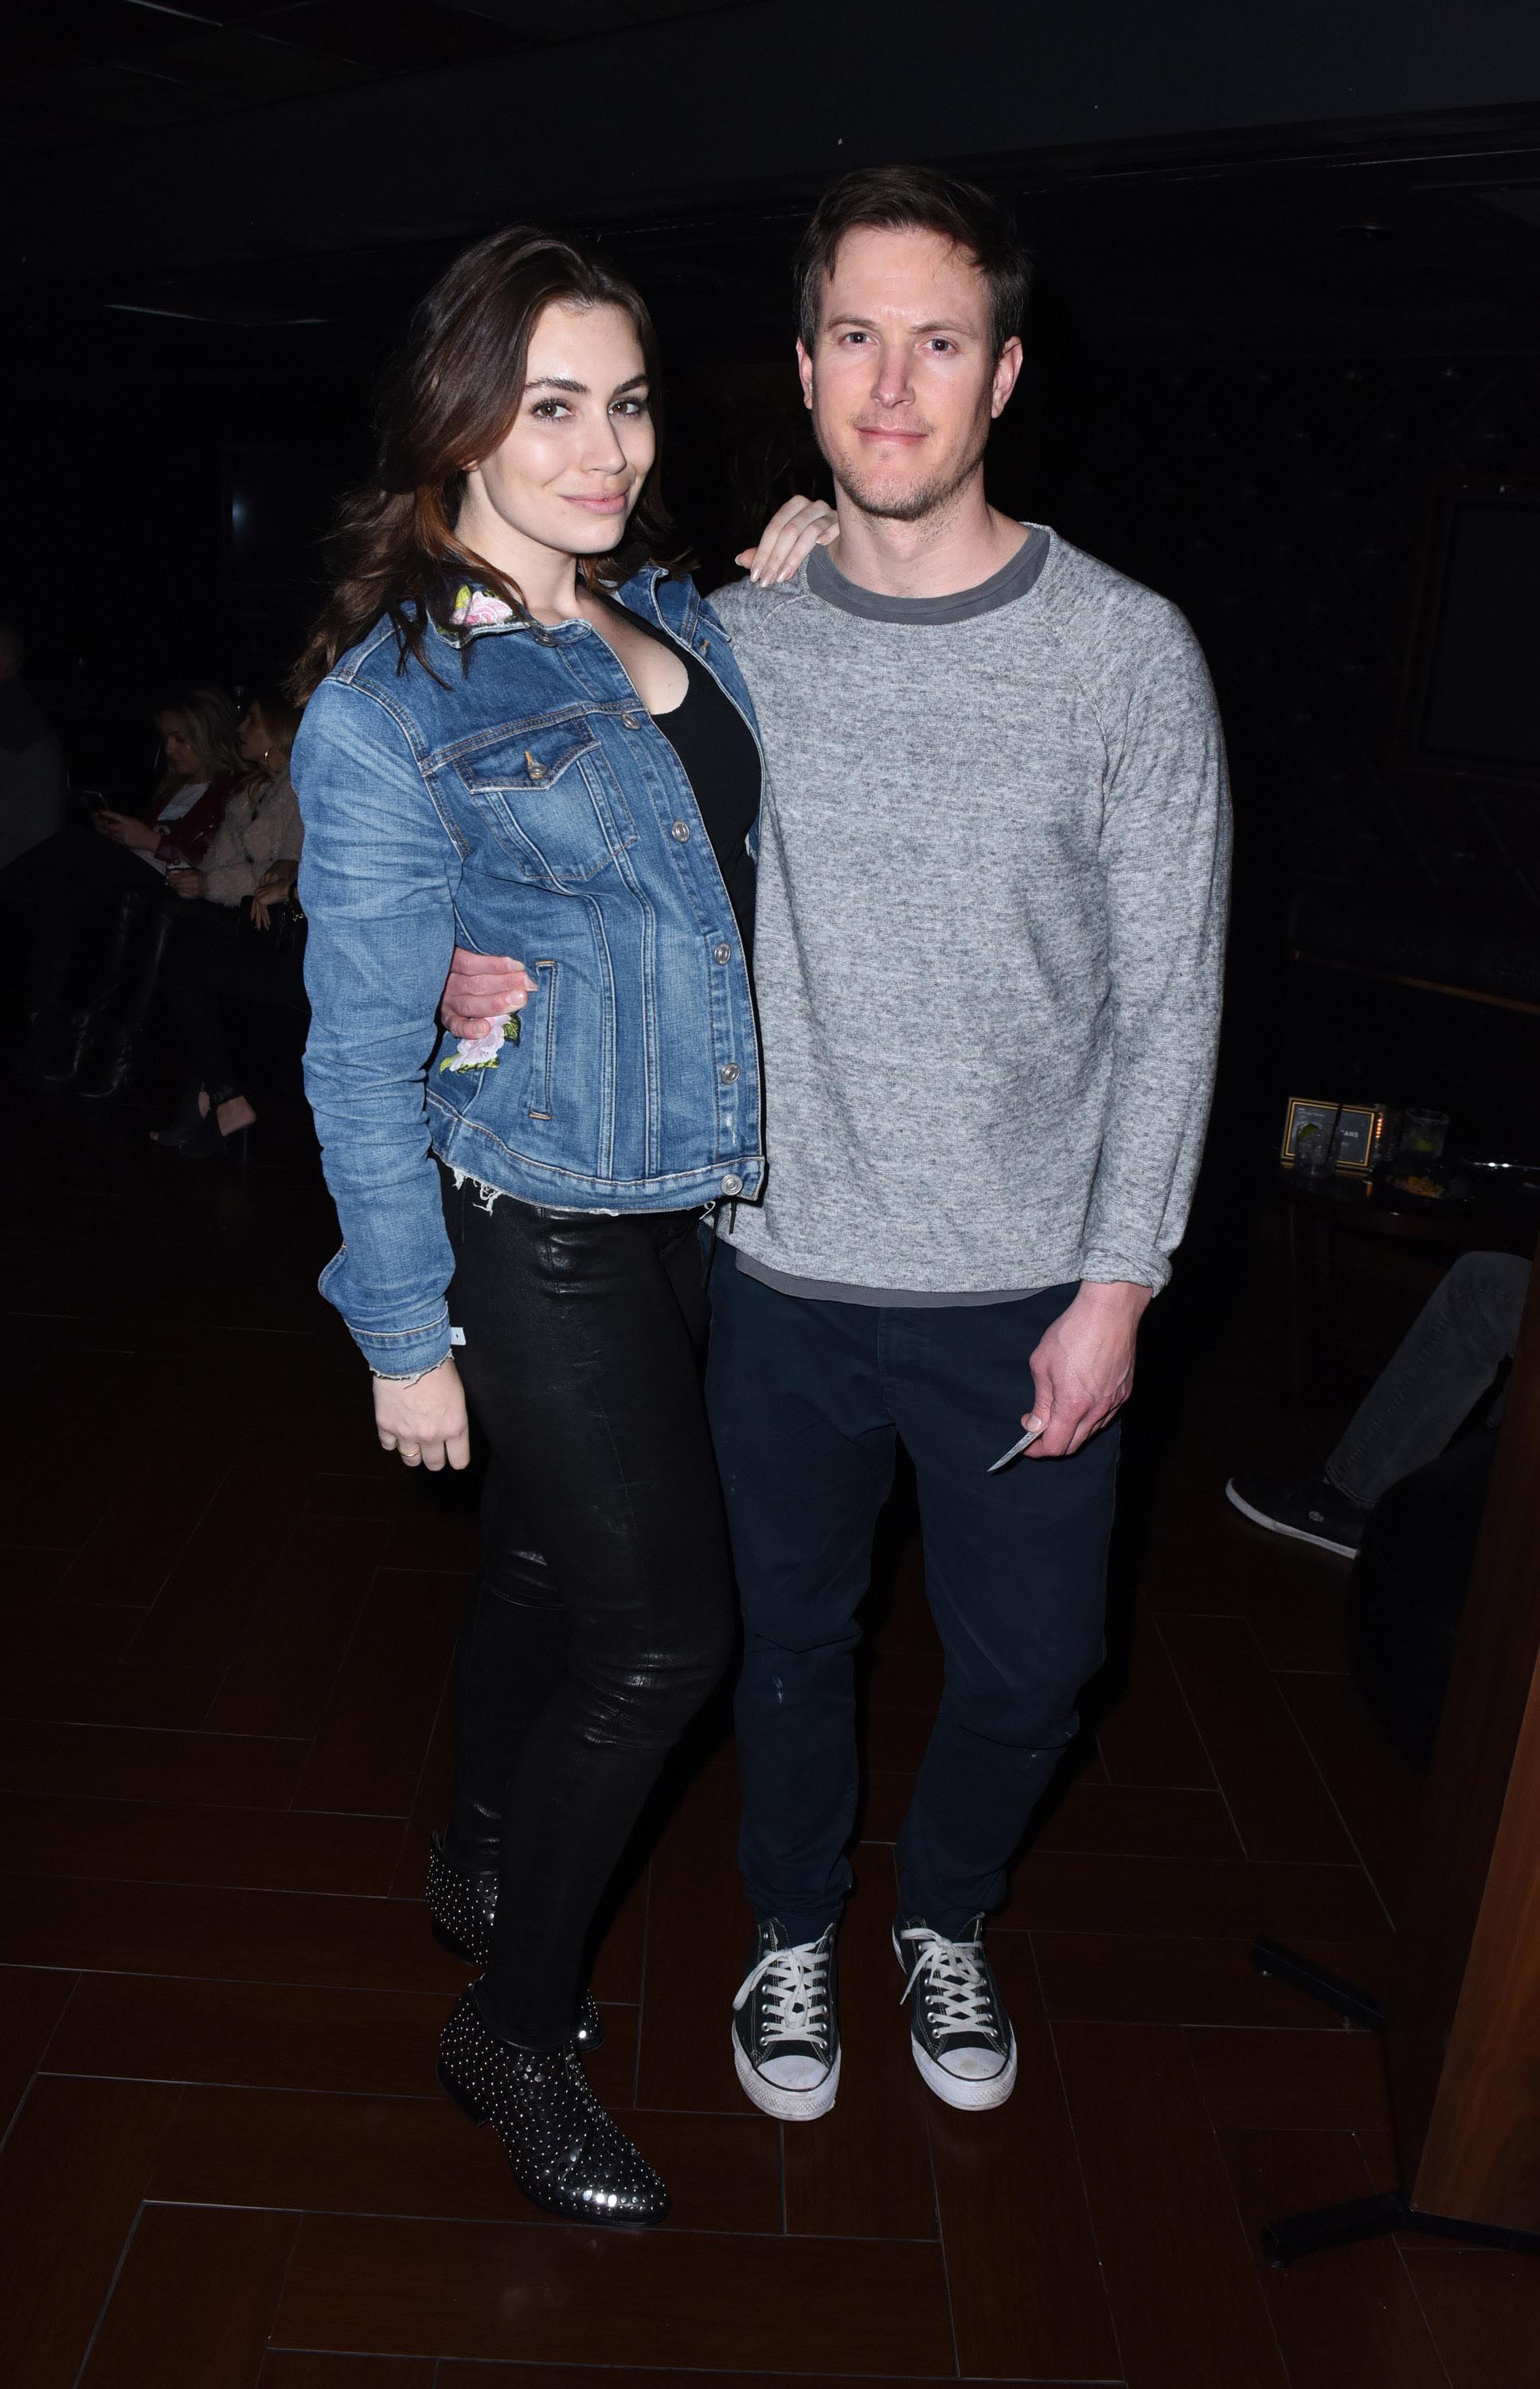 Sophie Tweed-Simmons attends a private event hosted by Hudson